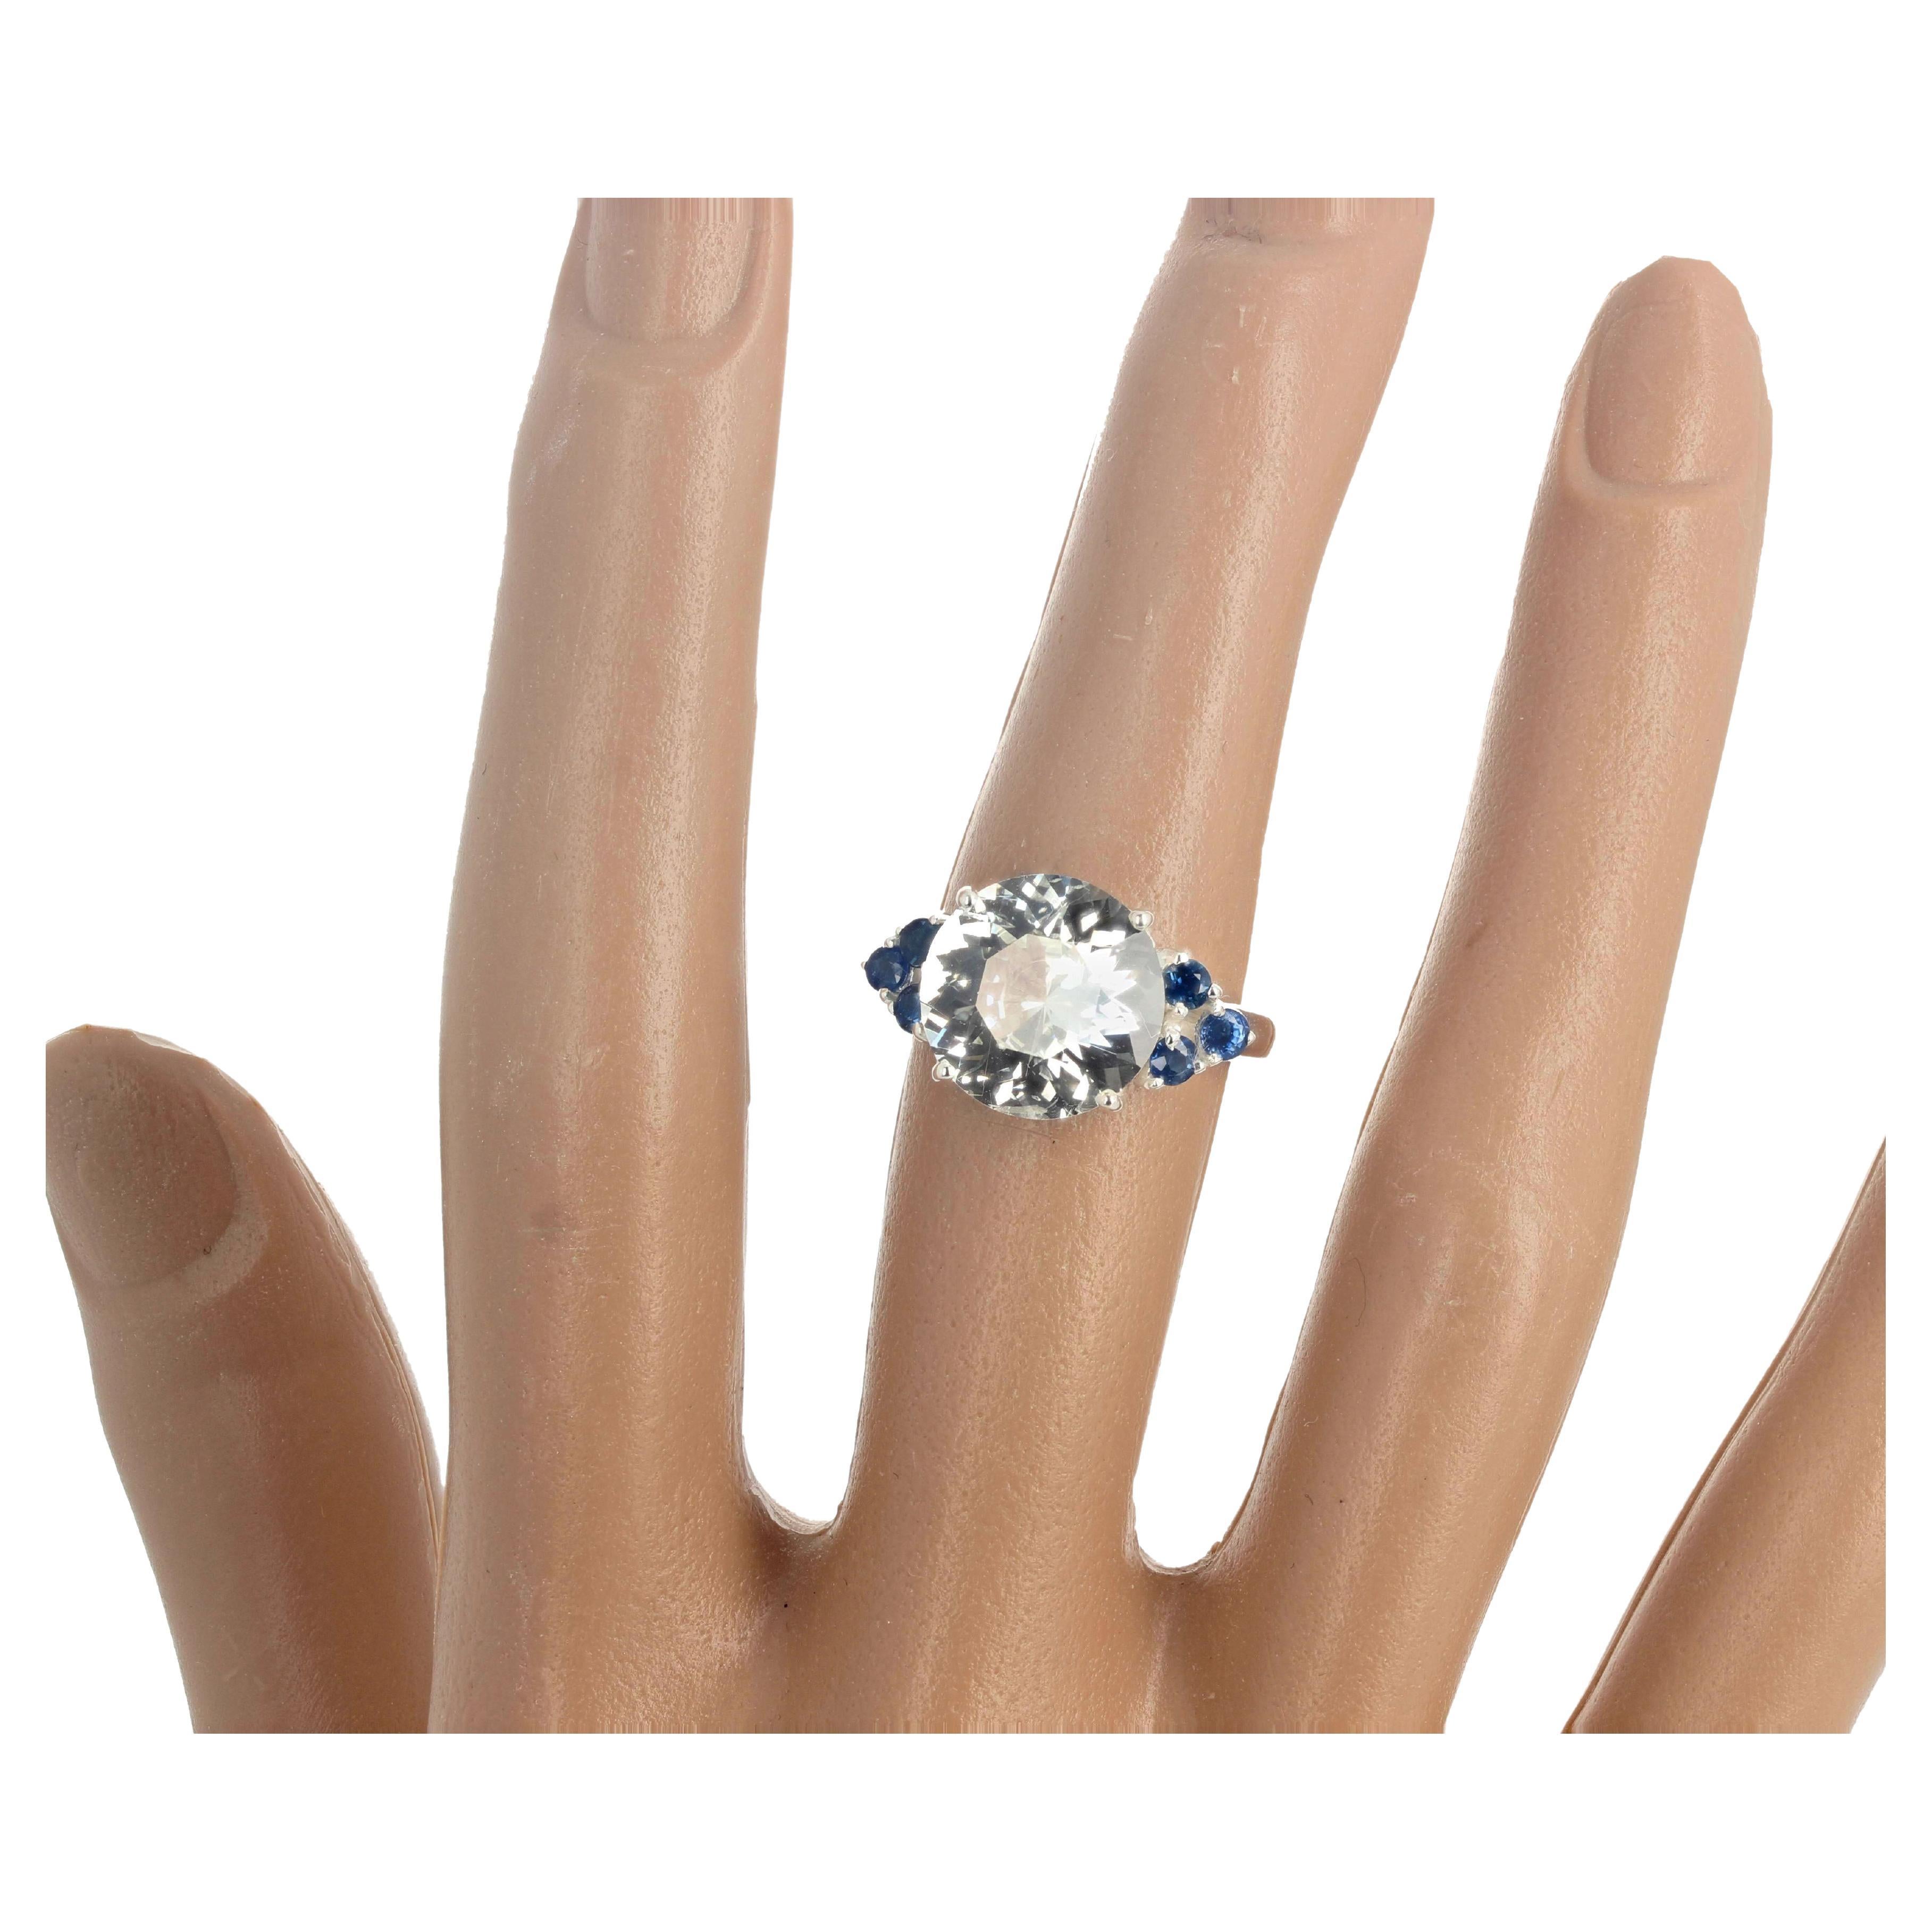 Round Cut AJD Glittering 6.52 Carat Natural Fiery White Zircon & Blue Sapphires Ring For Sale